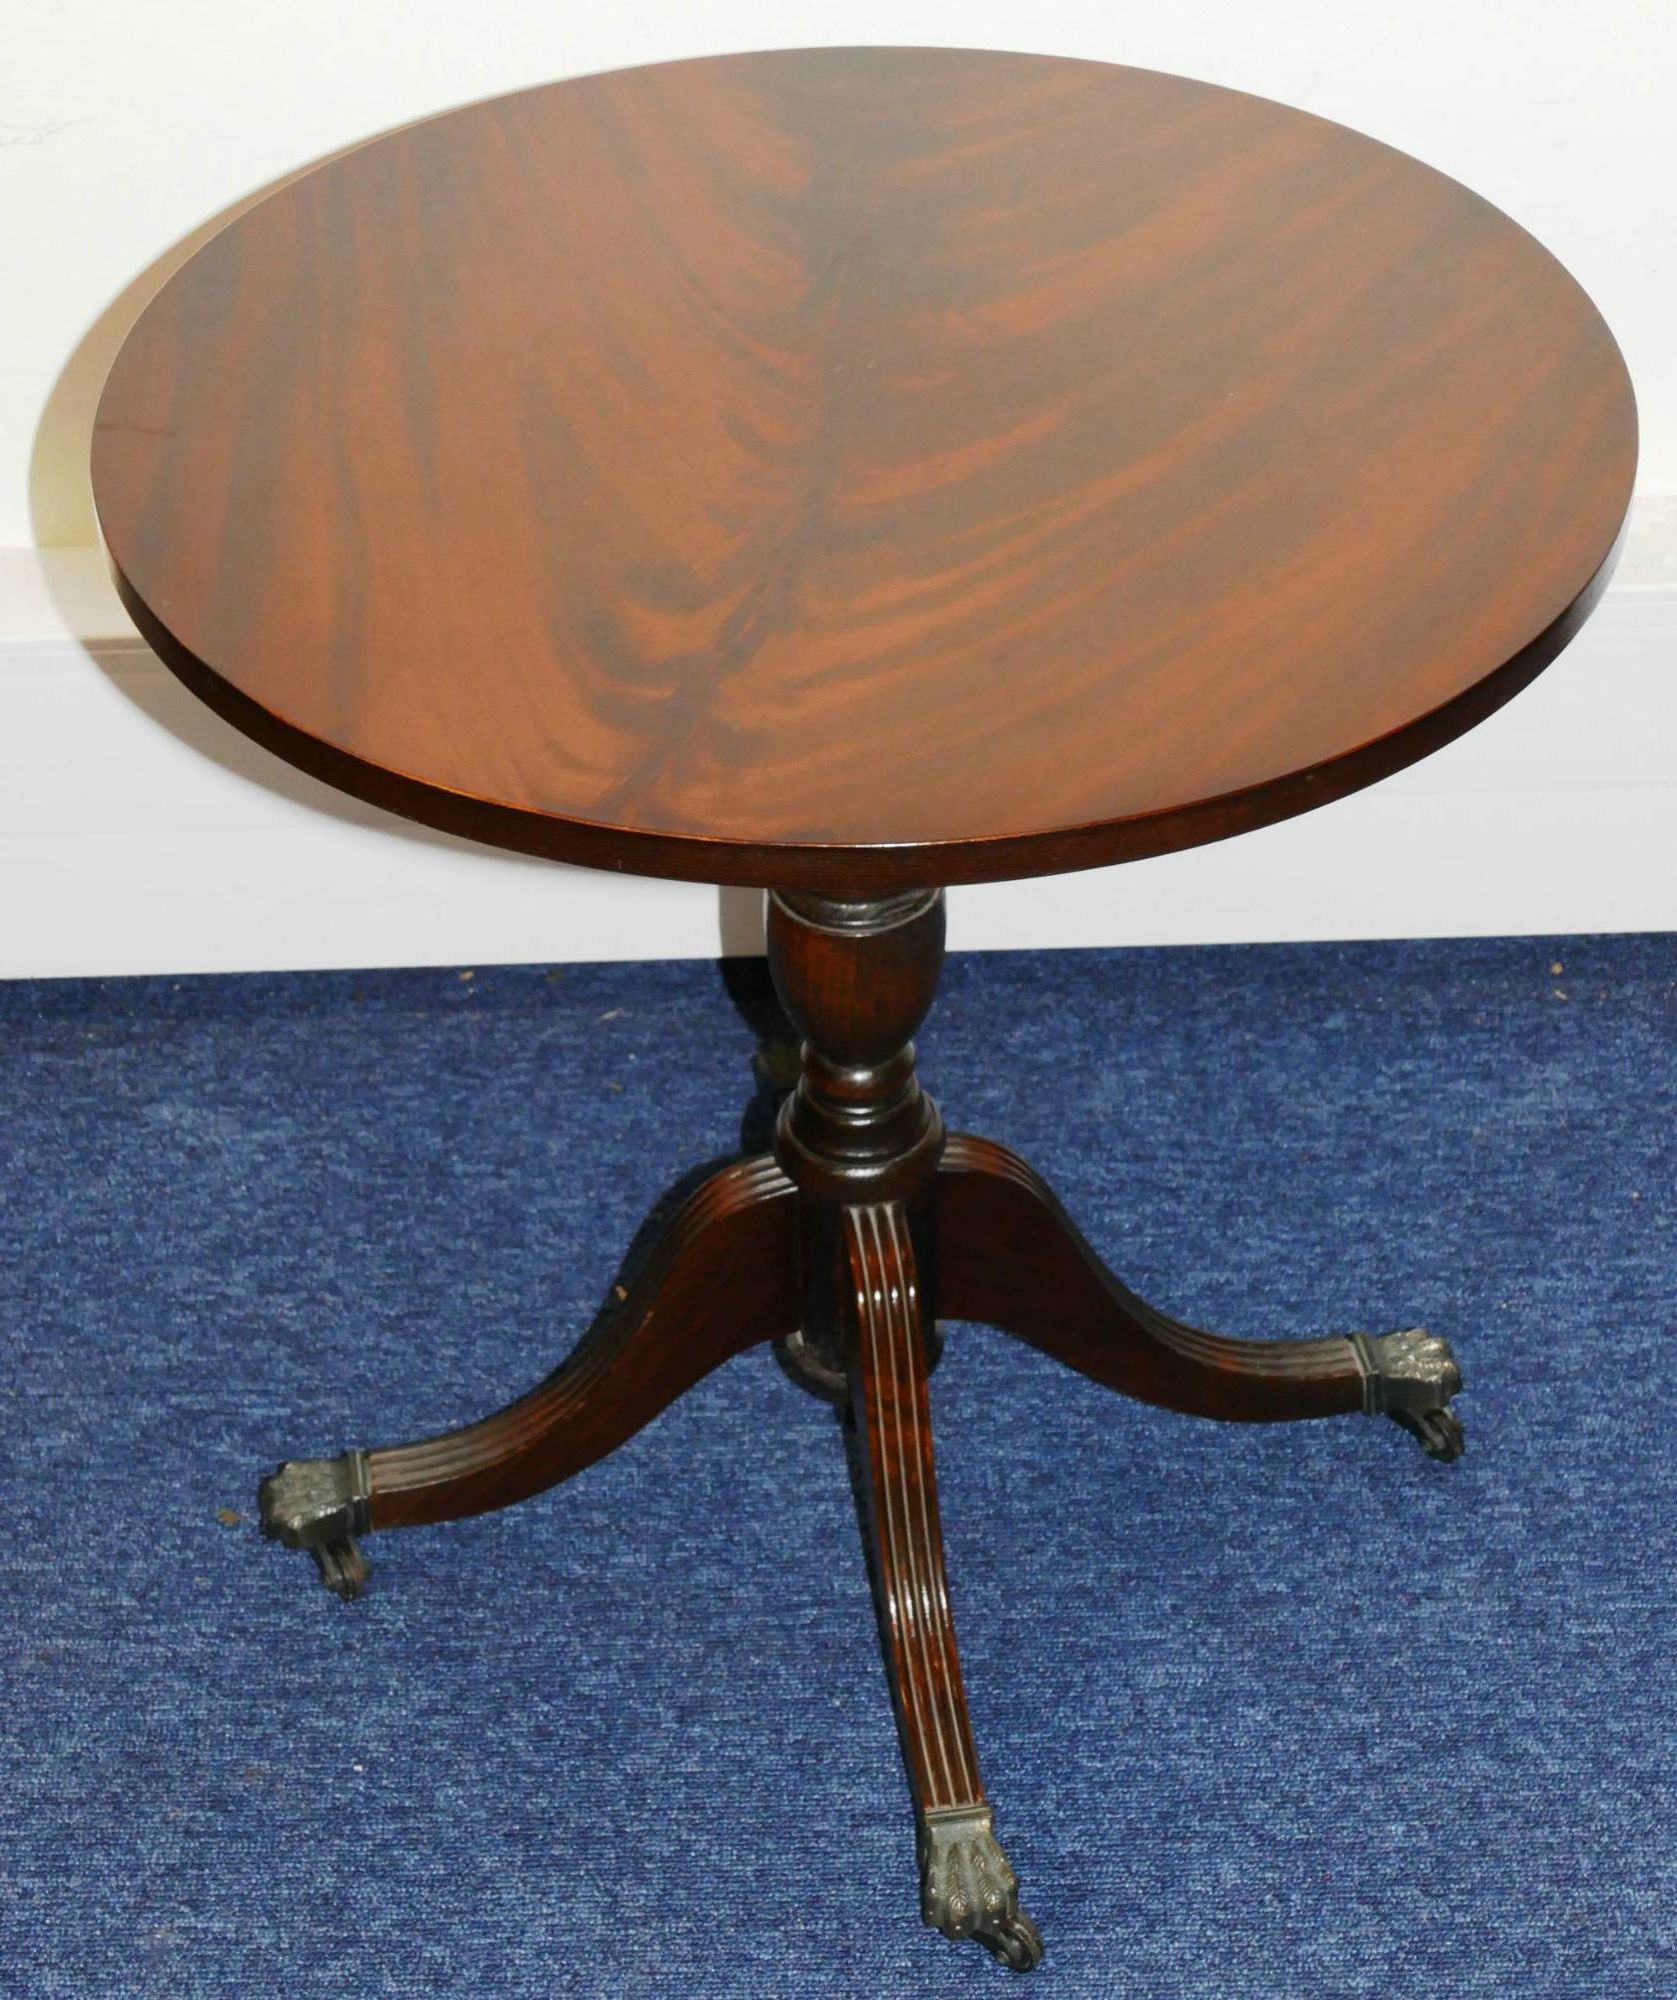 Fashionable Splayed Metal Legs Coffee Tables Regarding A Reproduction Mahogany Round Coffee Table On Turned Stem Having 4 Splayed  Legs With Gilt Metal Claw Feet And Casters, 49.5cm Diameter. From P.f (View 15 of 20)